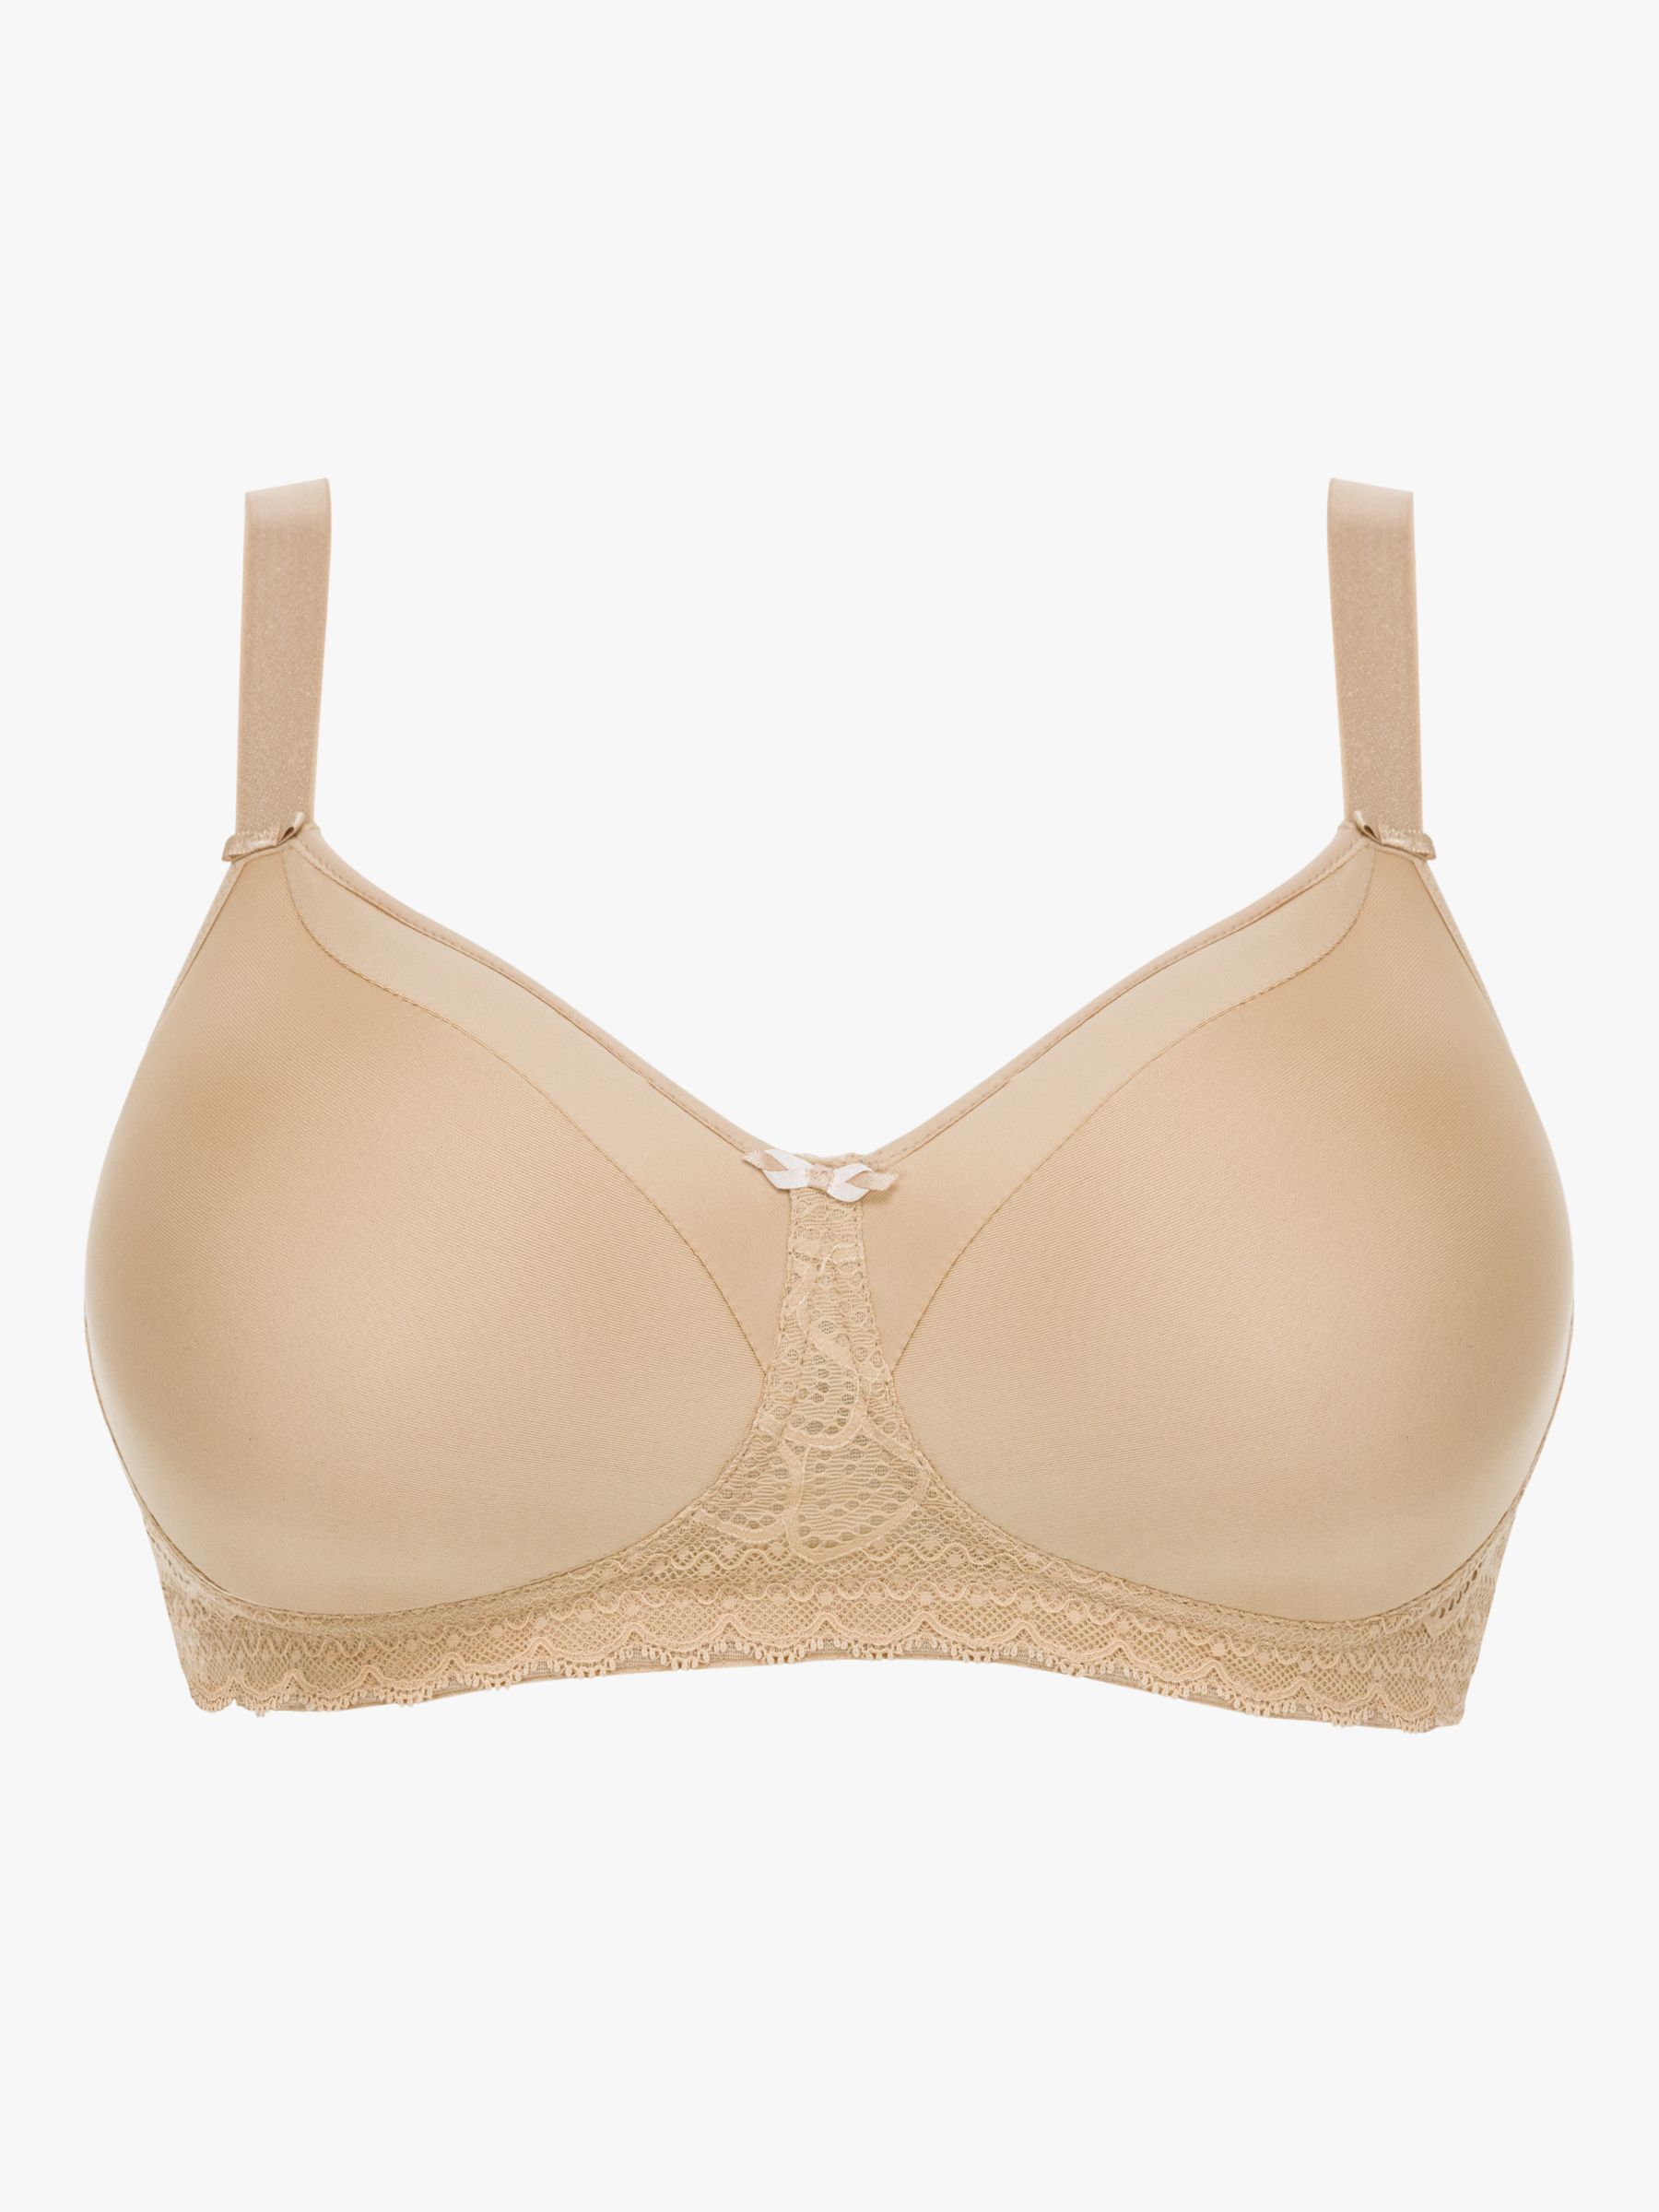 CHANTELLE Intimates Beige Smoothing Back and Sides Full Coverage Bra 30DDD  